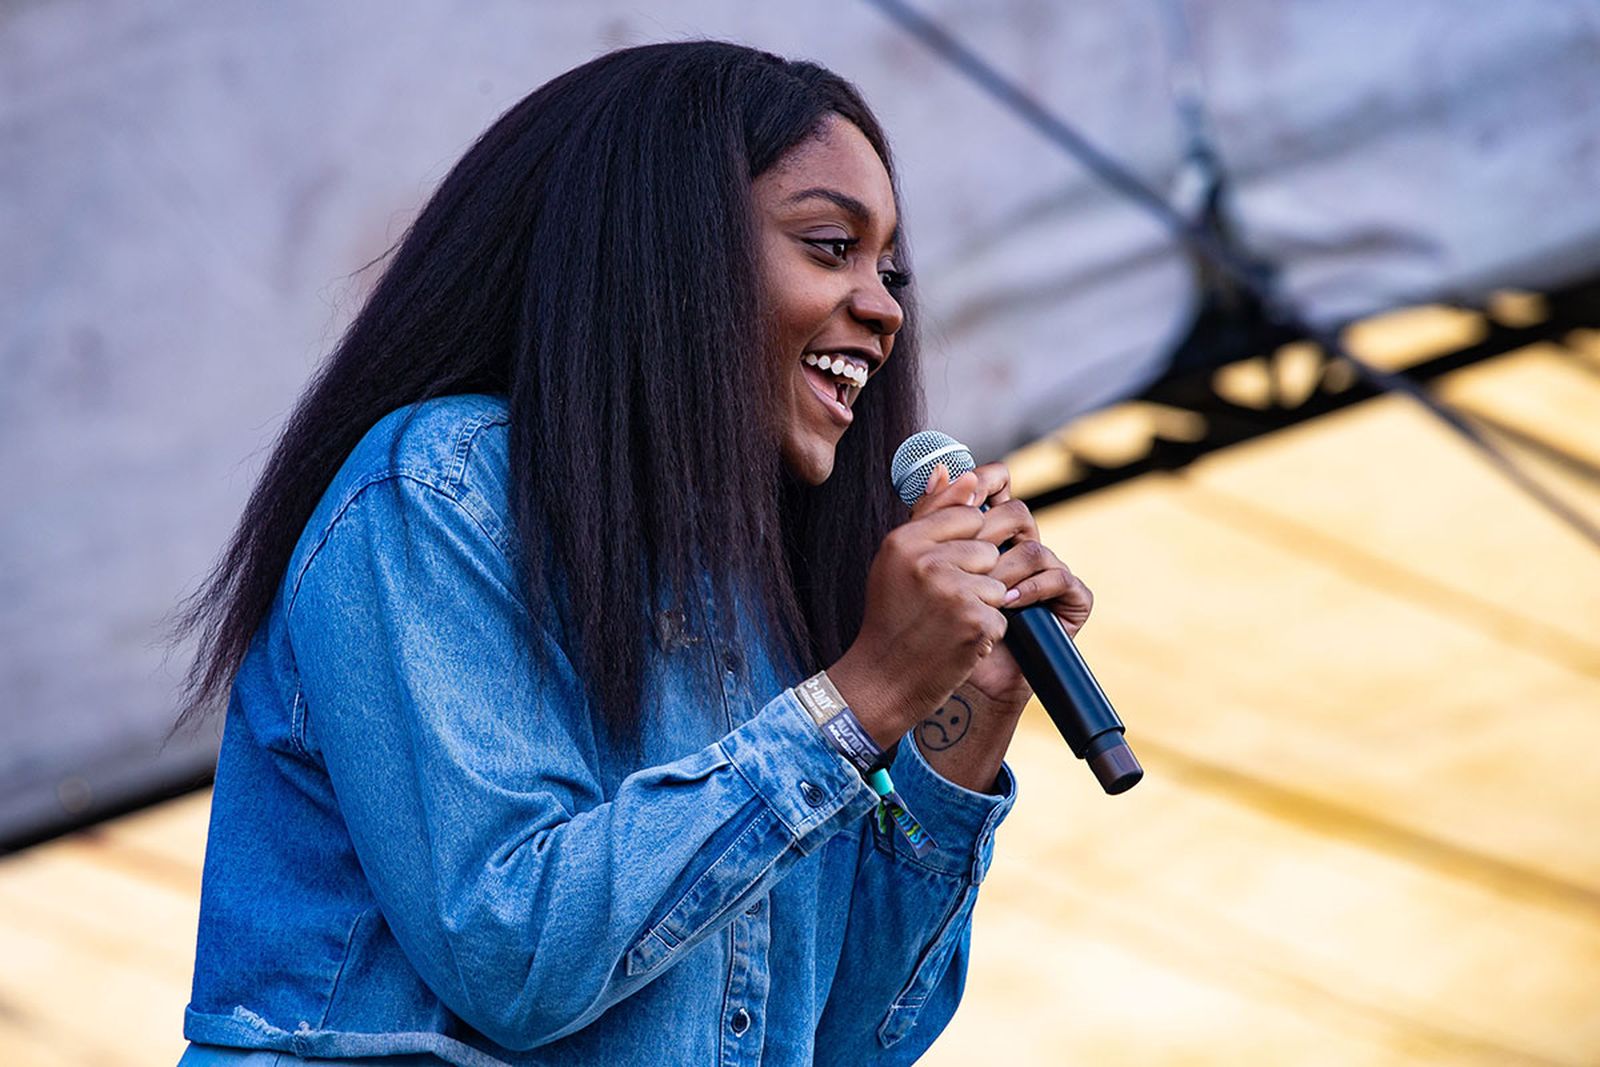 noname performing jeans jacket